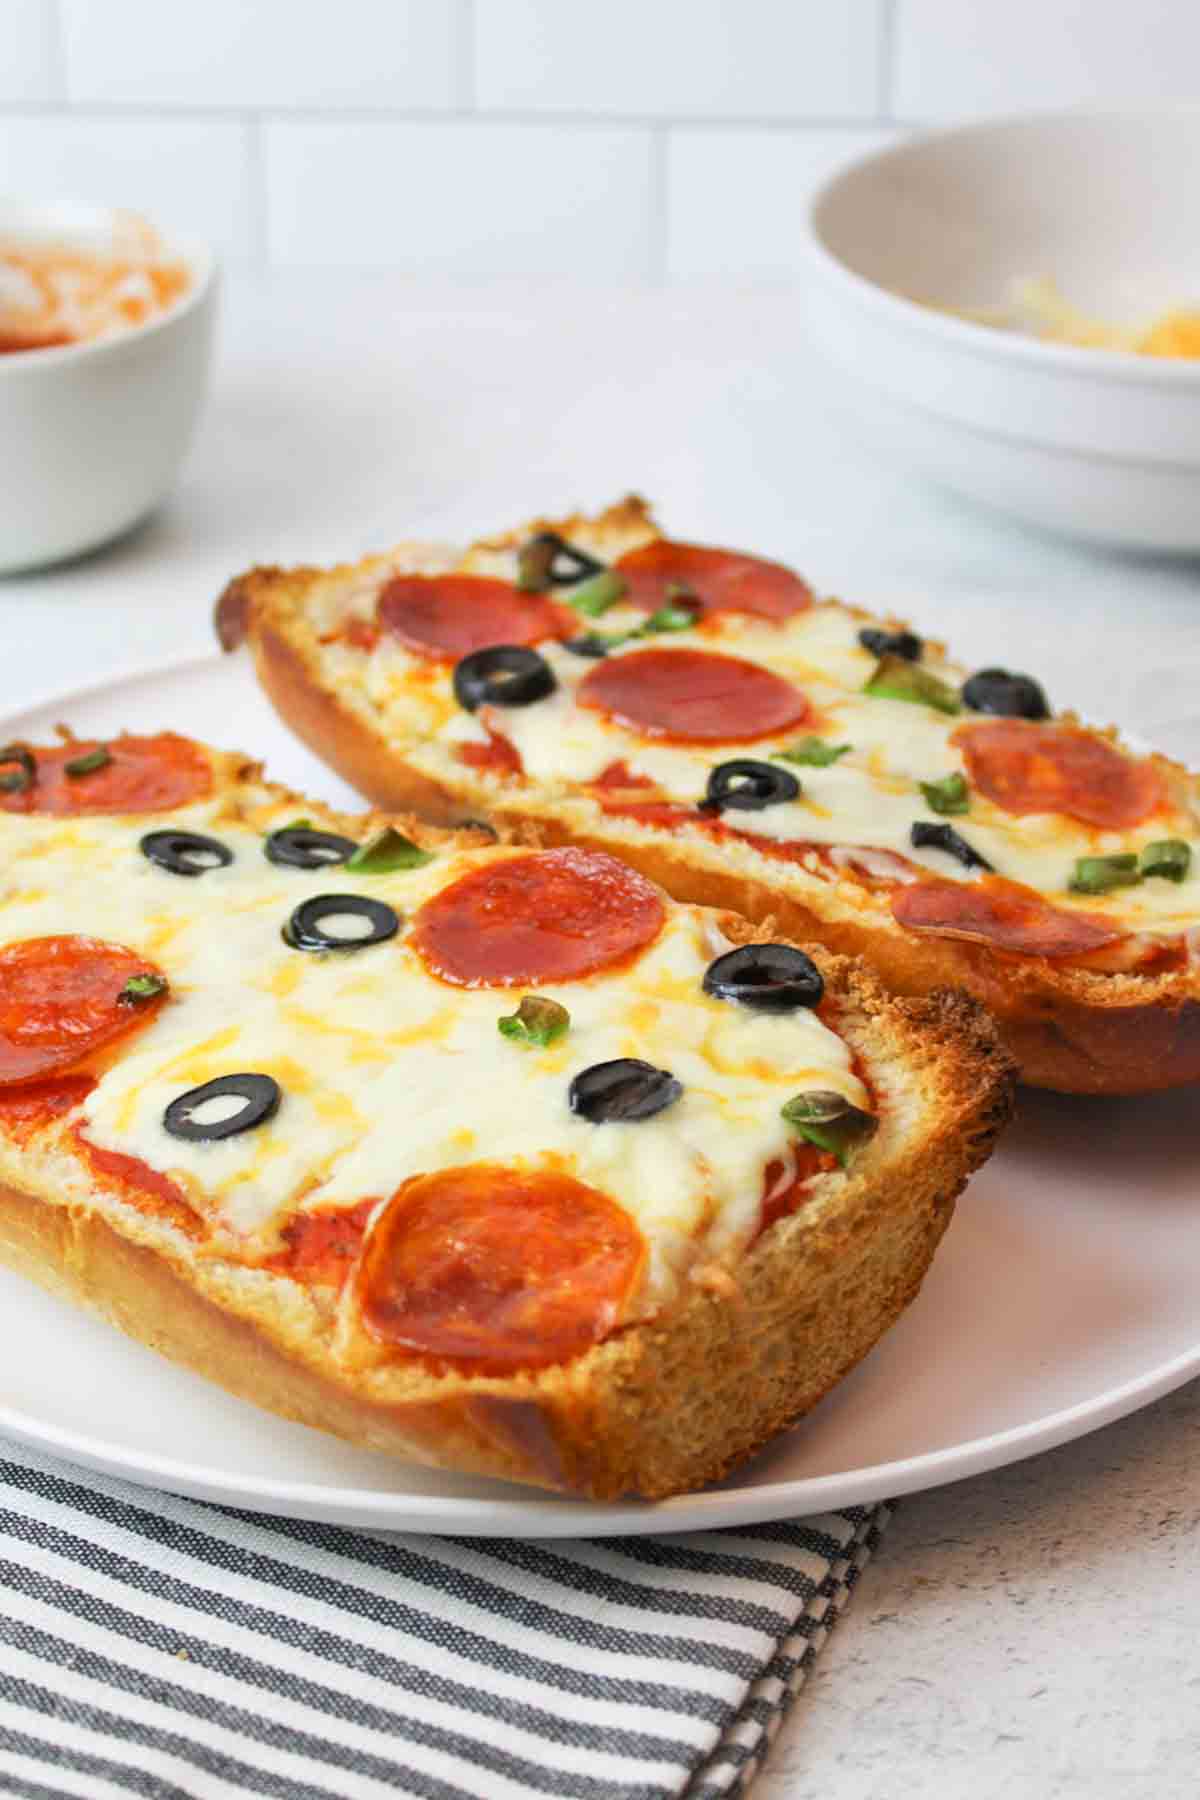 two baked halves of french bread pizza on a white plate.